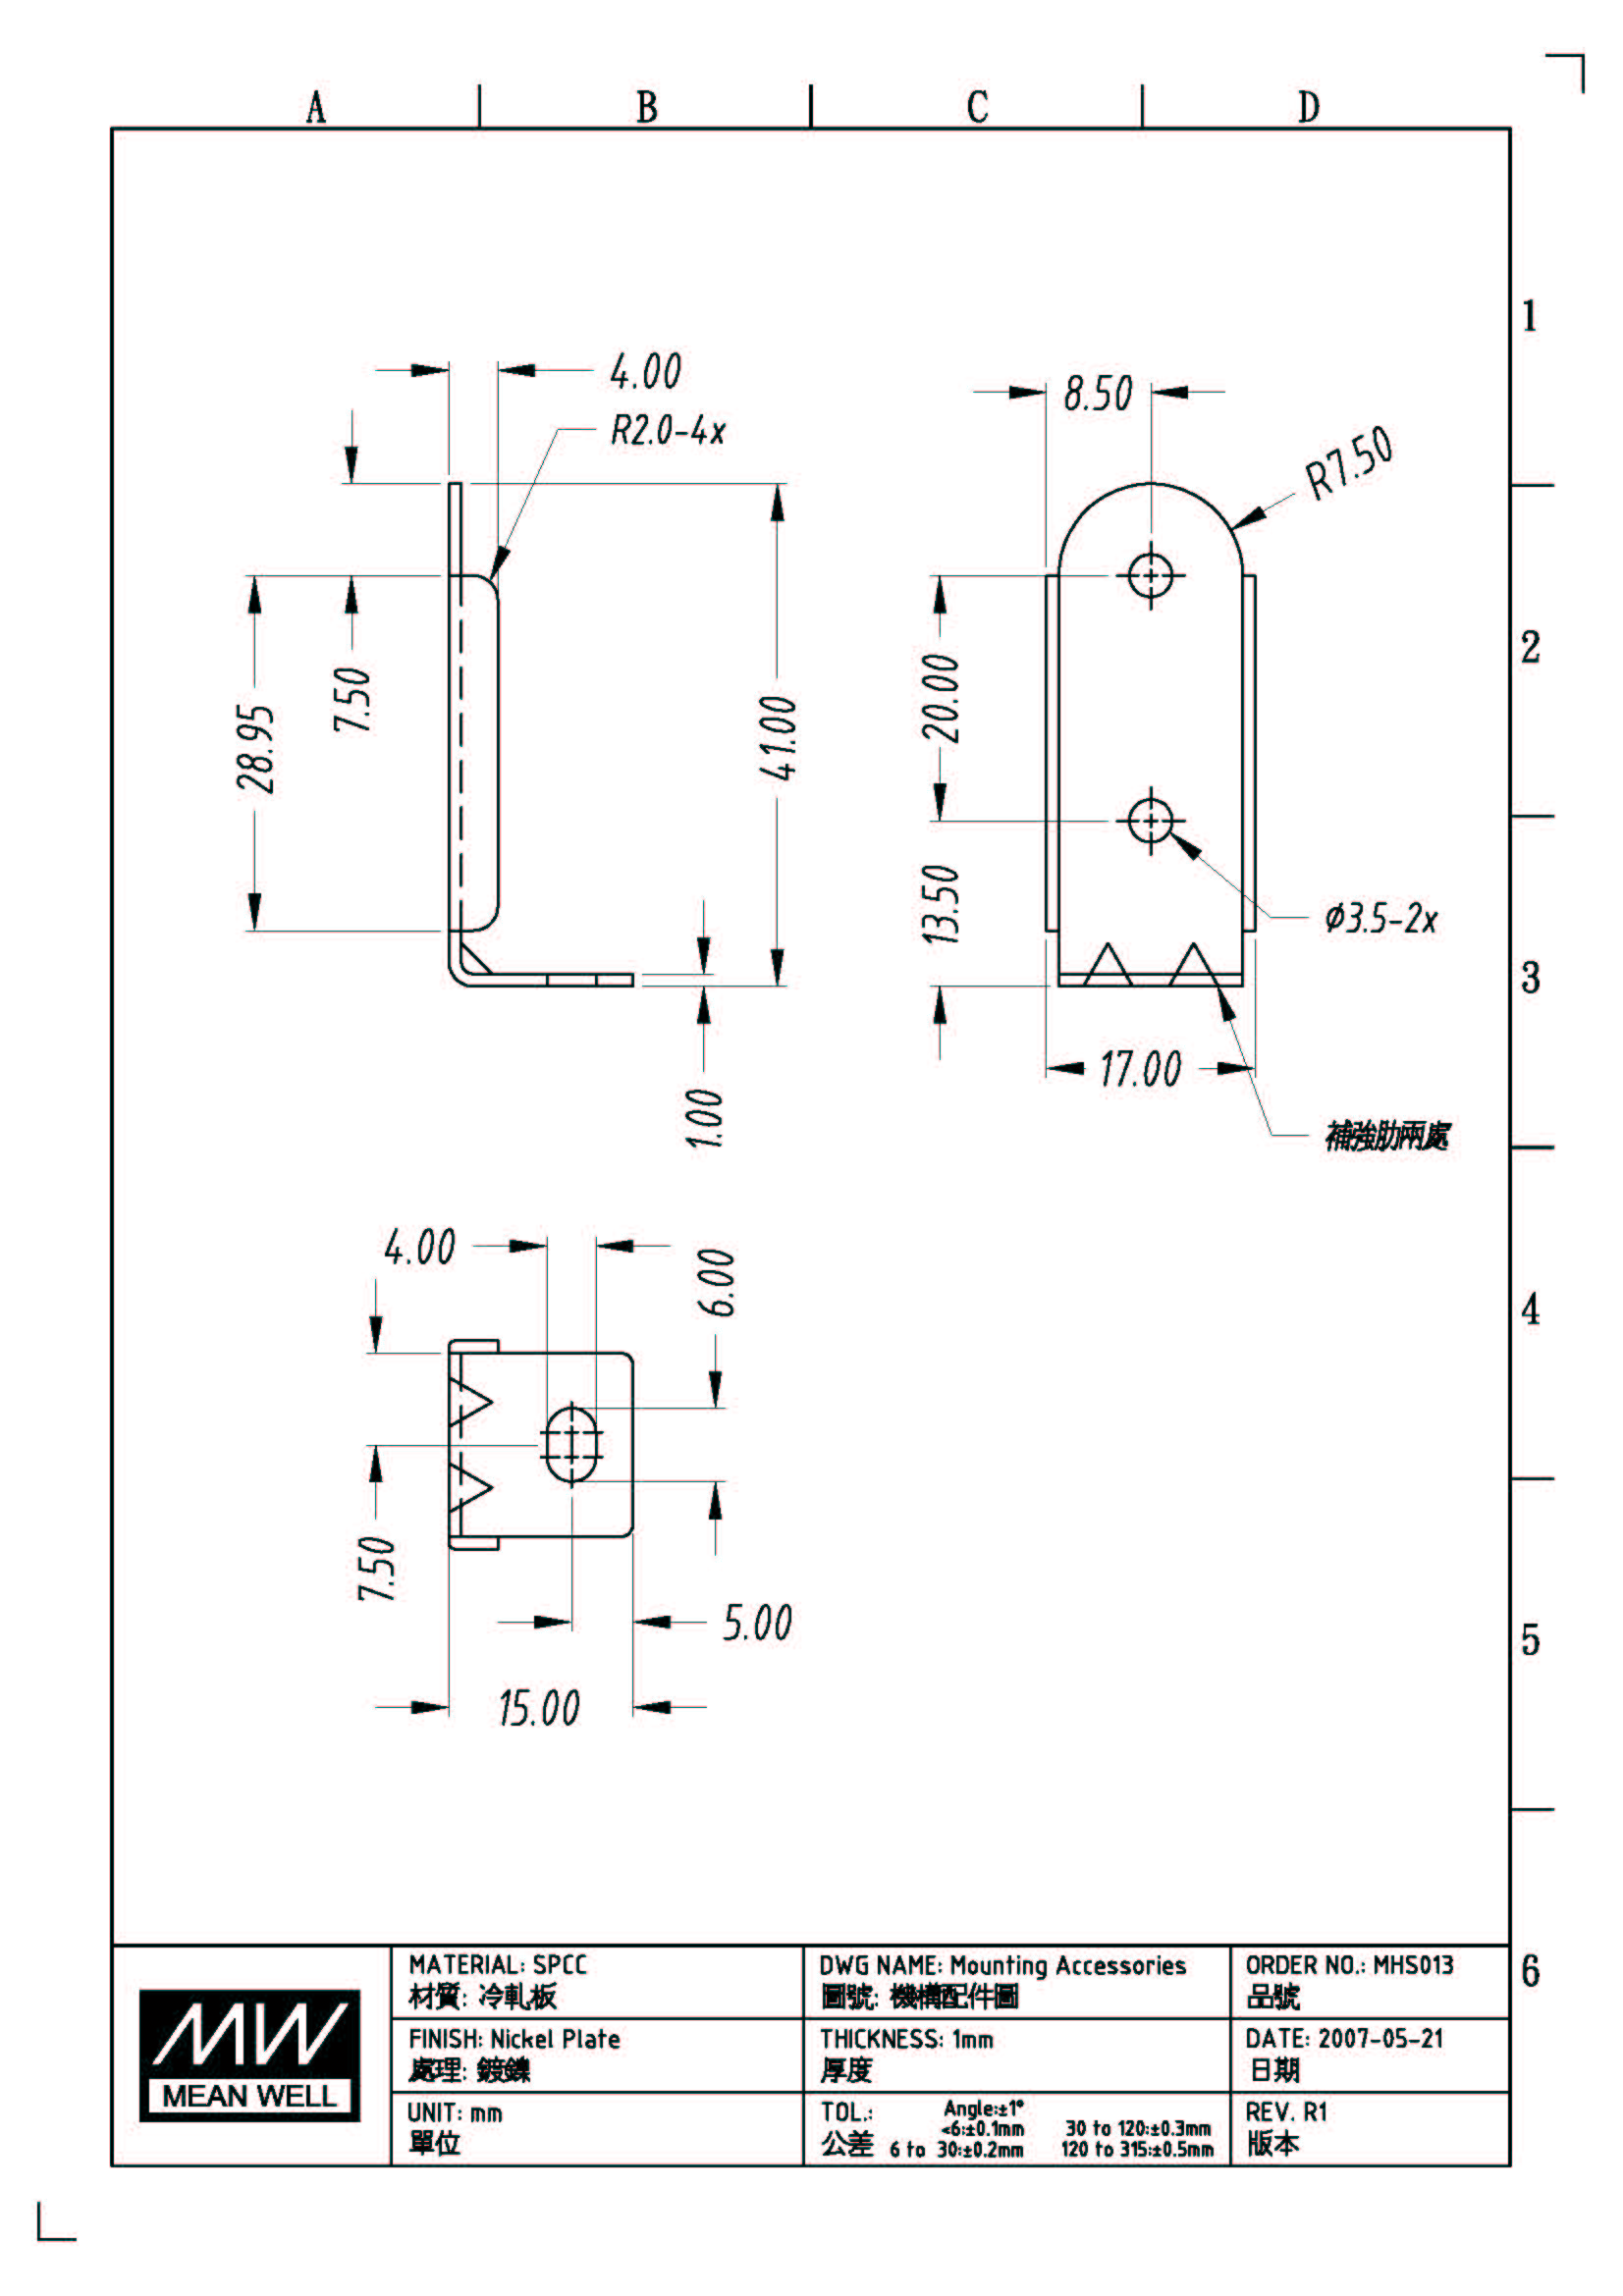 Mean Well Mounting Accessories MHS013 - Mount Hardware Diagram Graphic